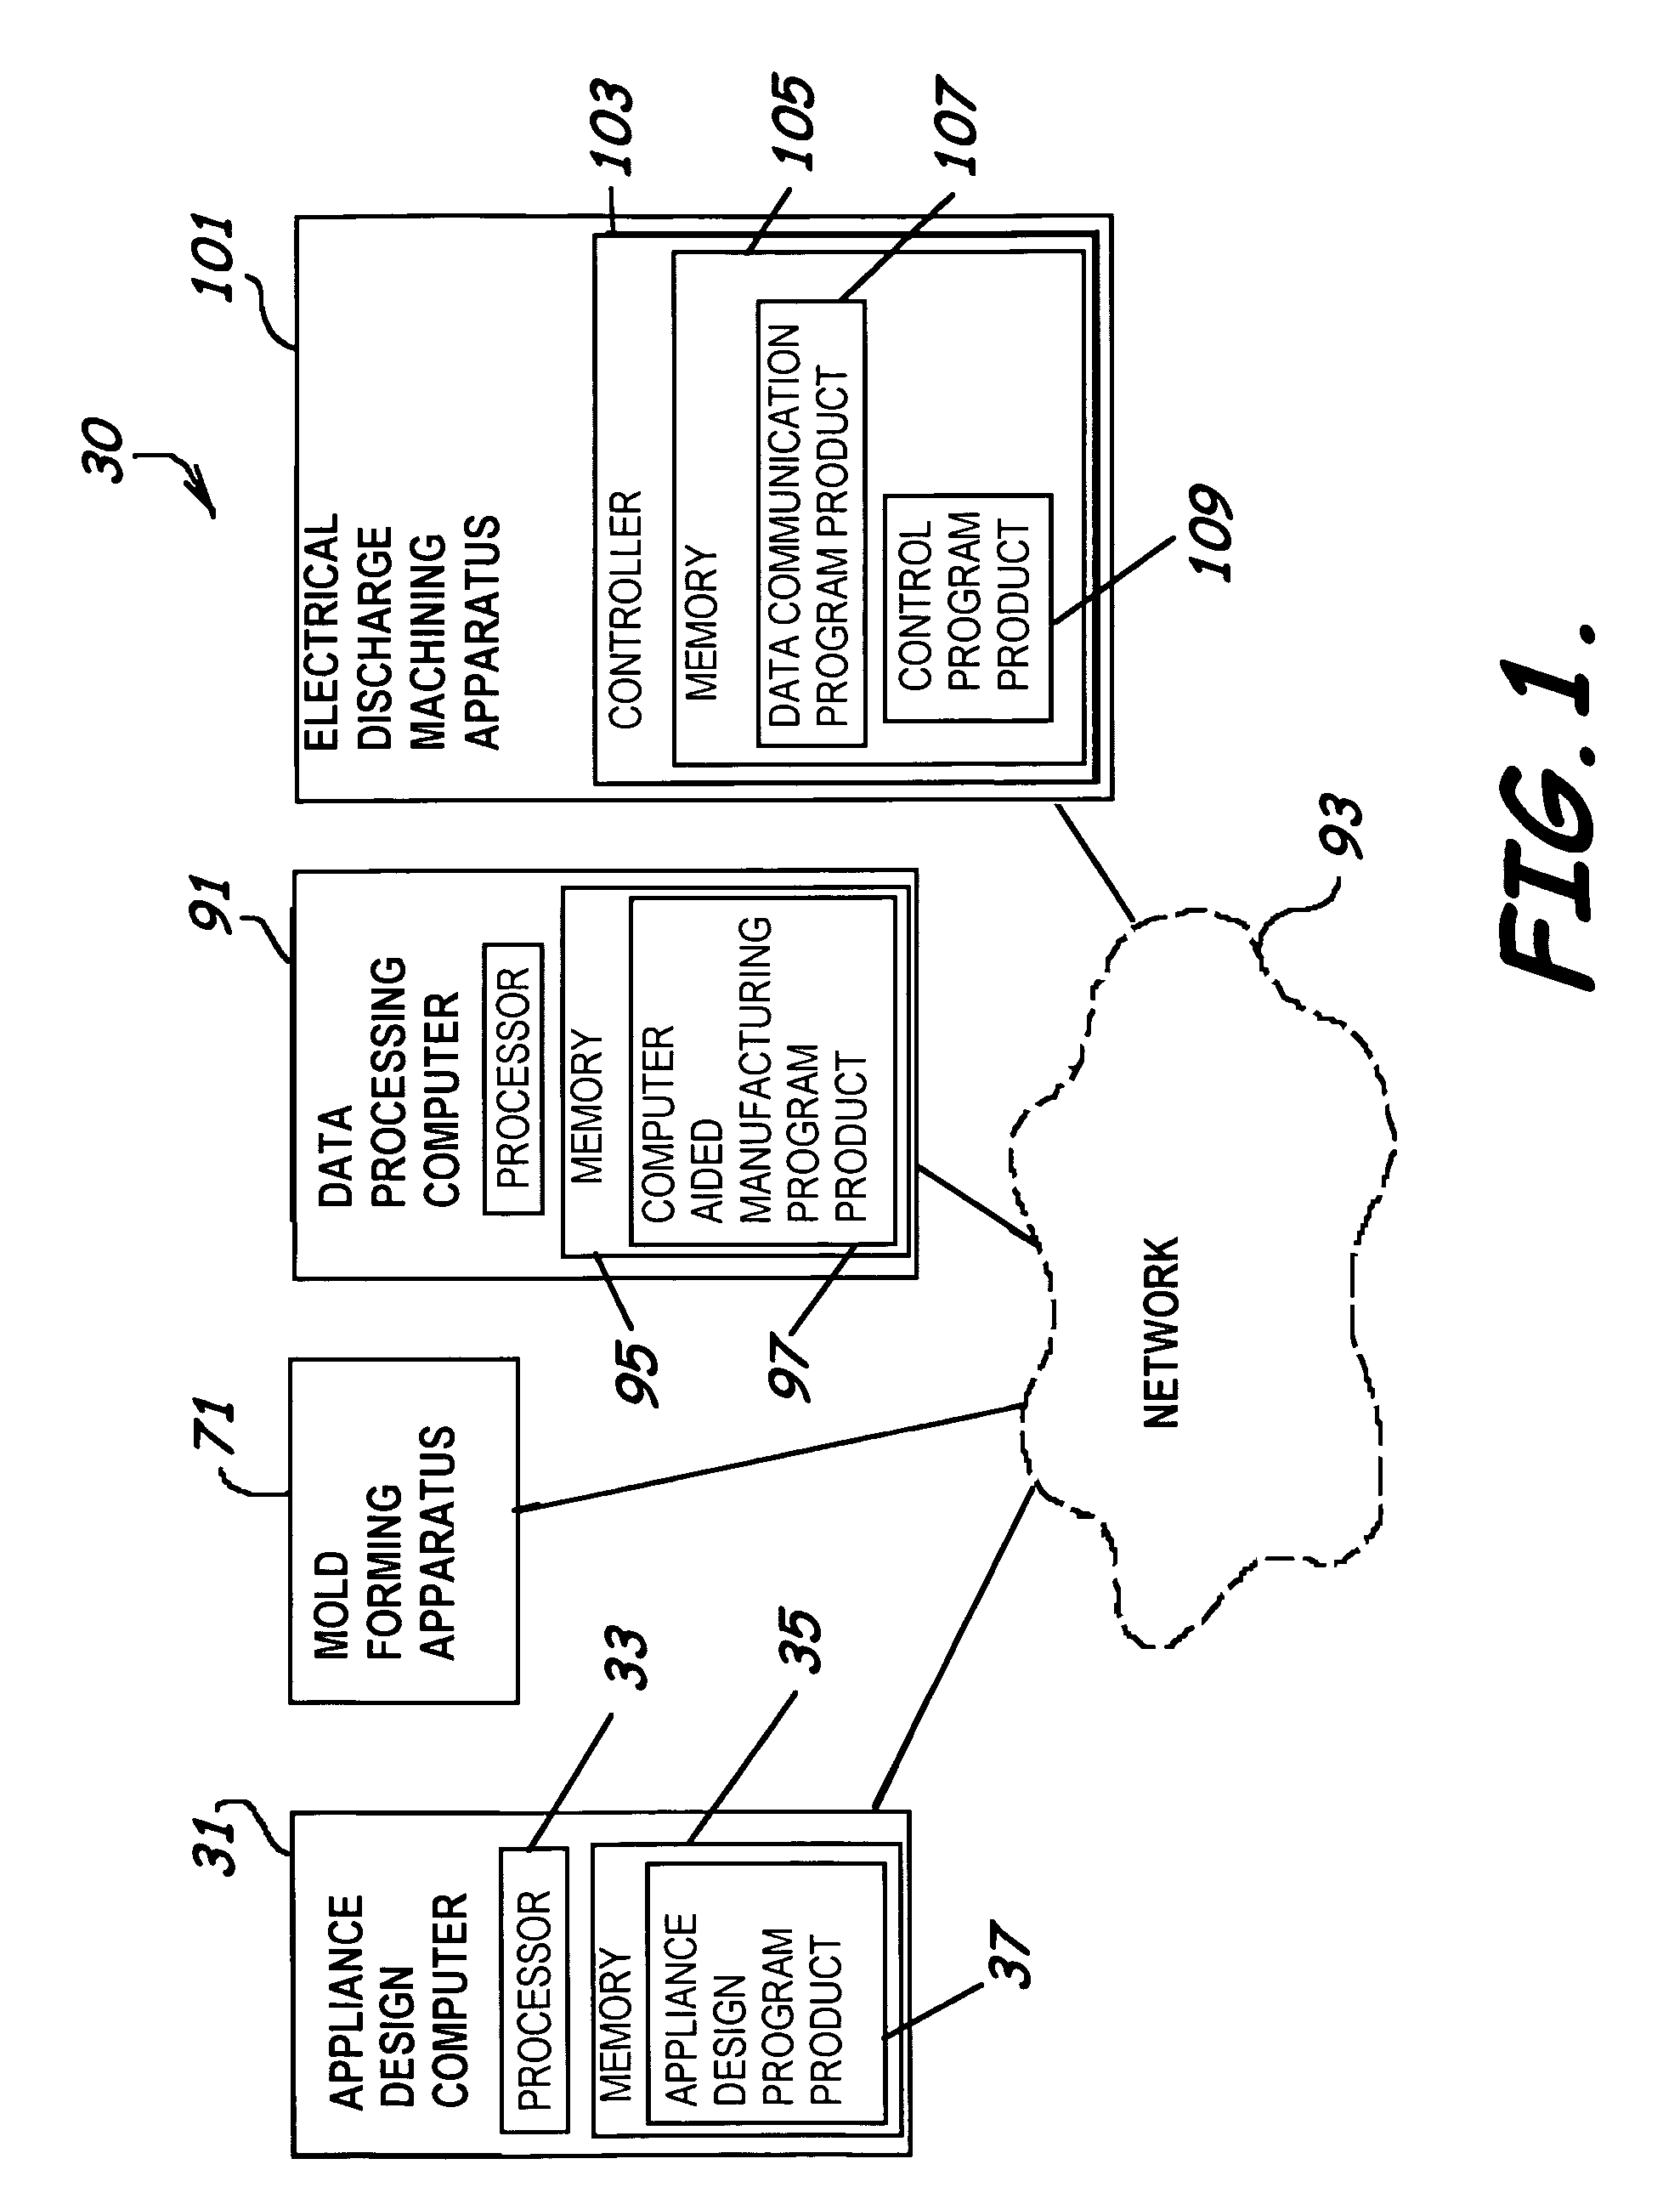 System to manufacture custom orthodontic appliances, program product, and related methods